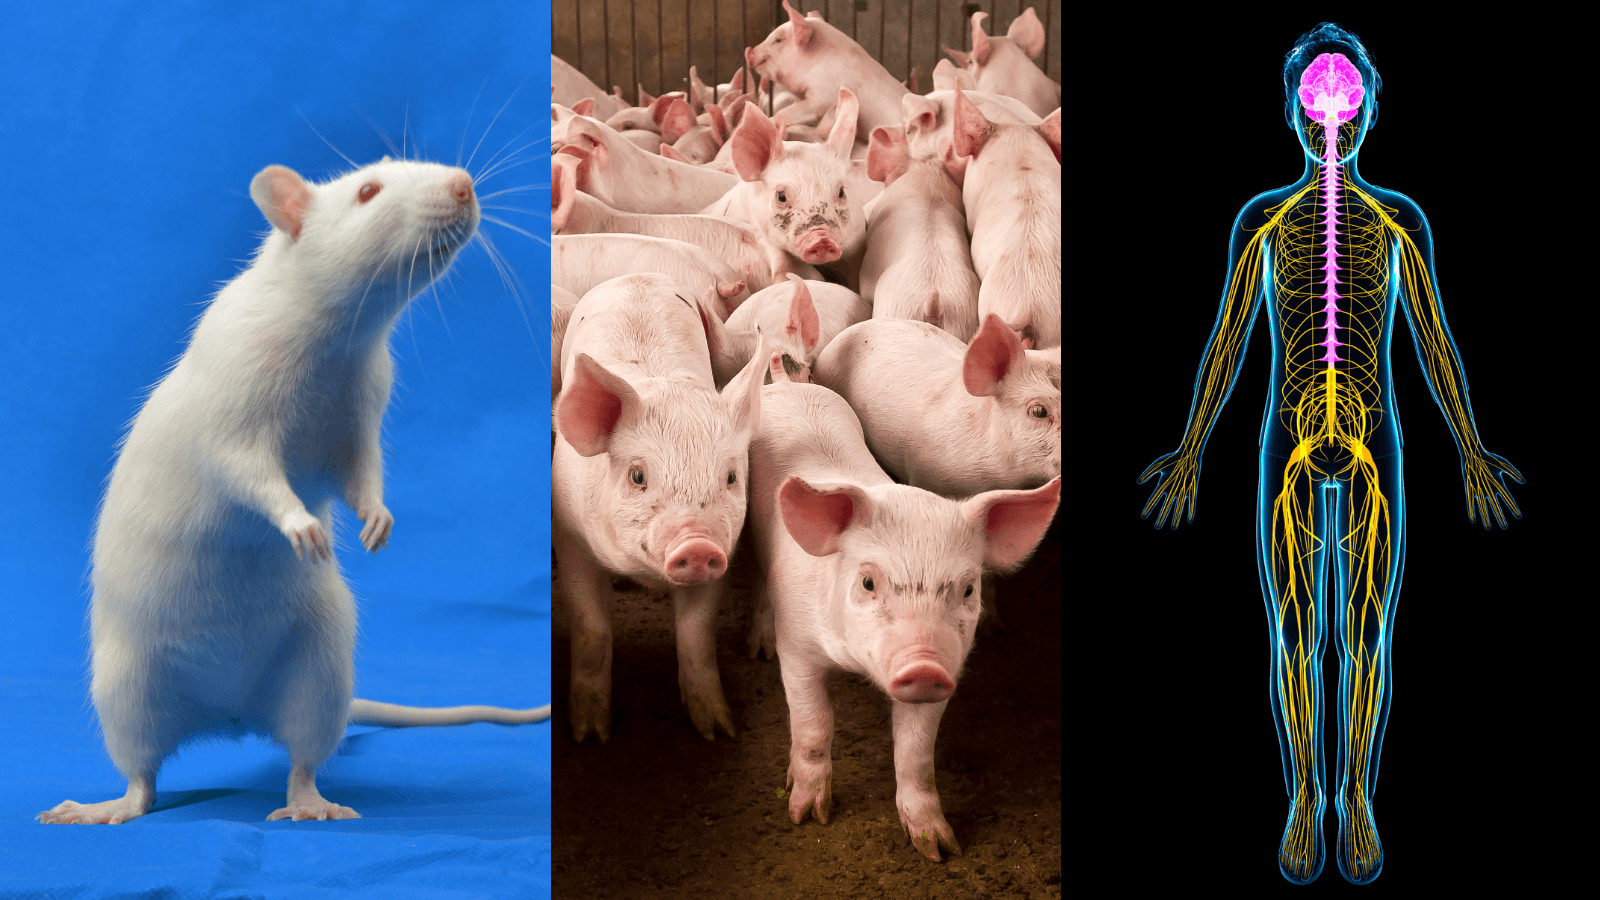 images of a rat, some pigs, and a human form with nerve endings